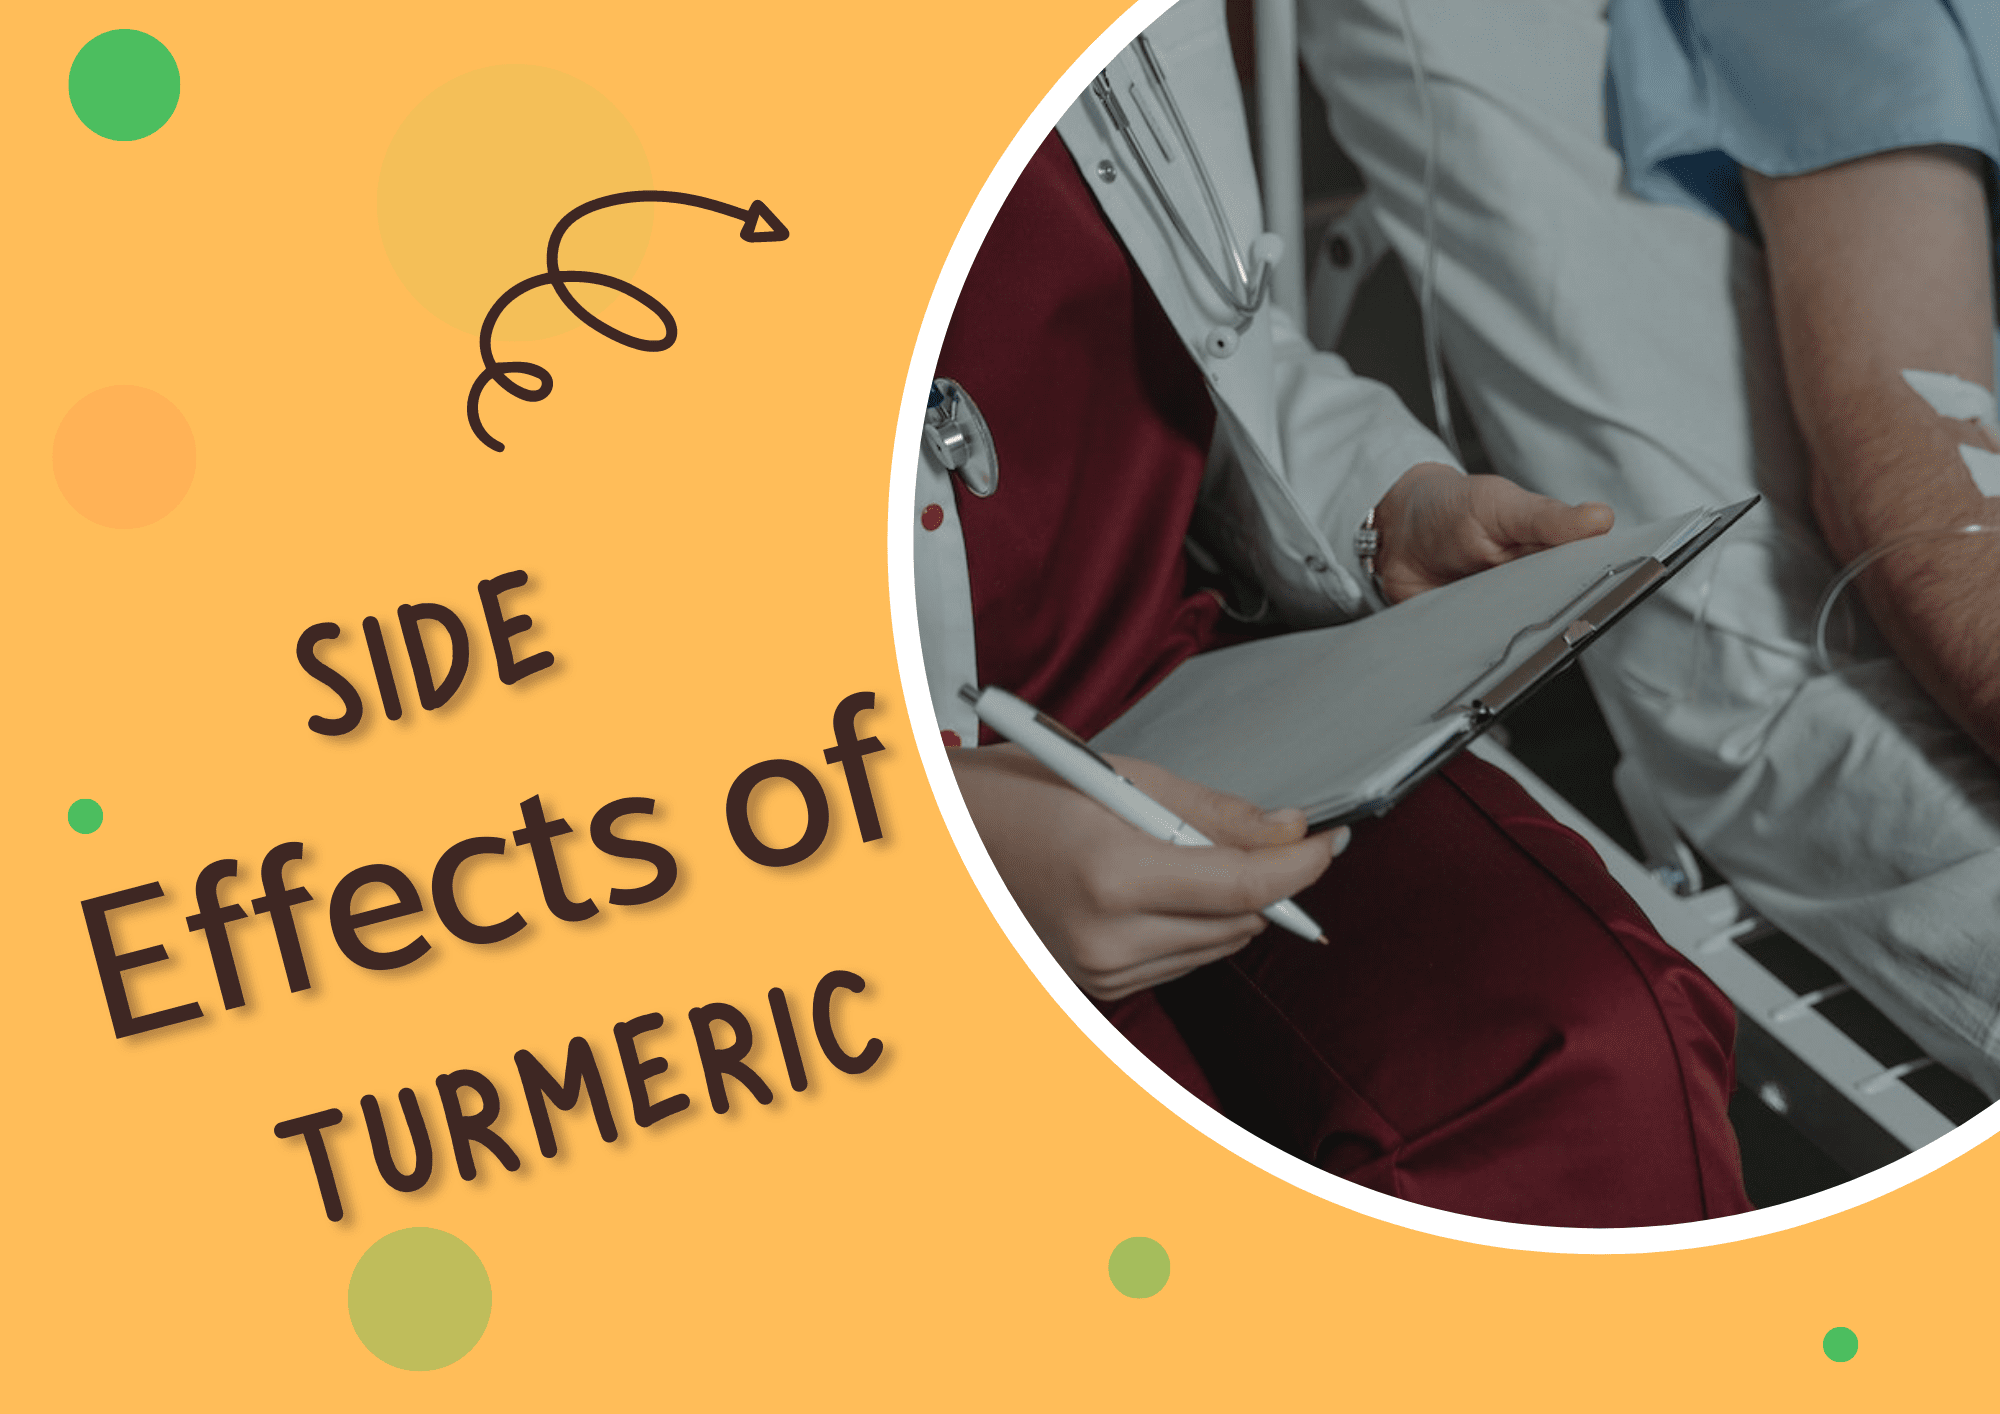 10 Serious Side Effects of Turmeric. While turmeric is generally considered safe and well-tolerated, some potential side effects exist. These can include stomach upset, decreased absorption of iron, and an increased risk of kidney stones.